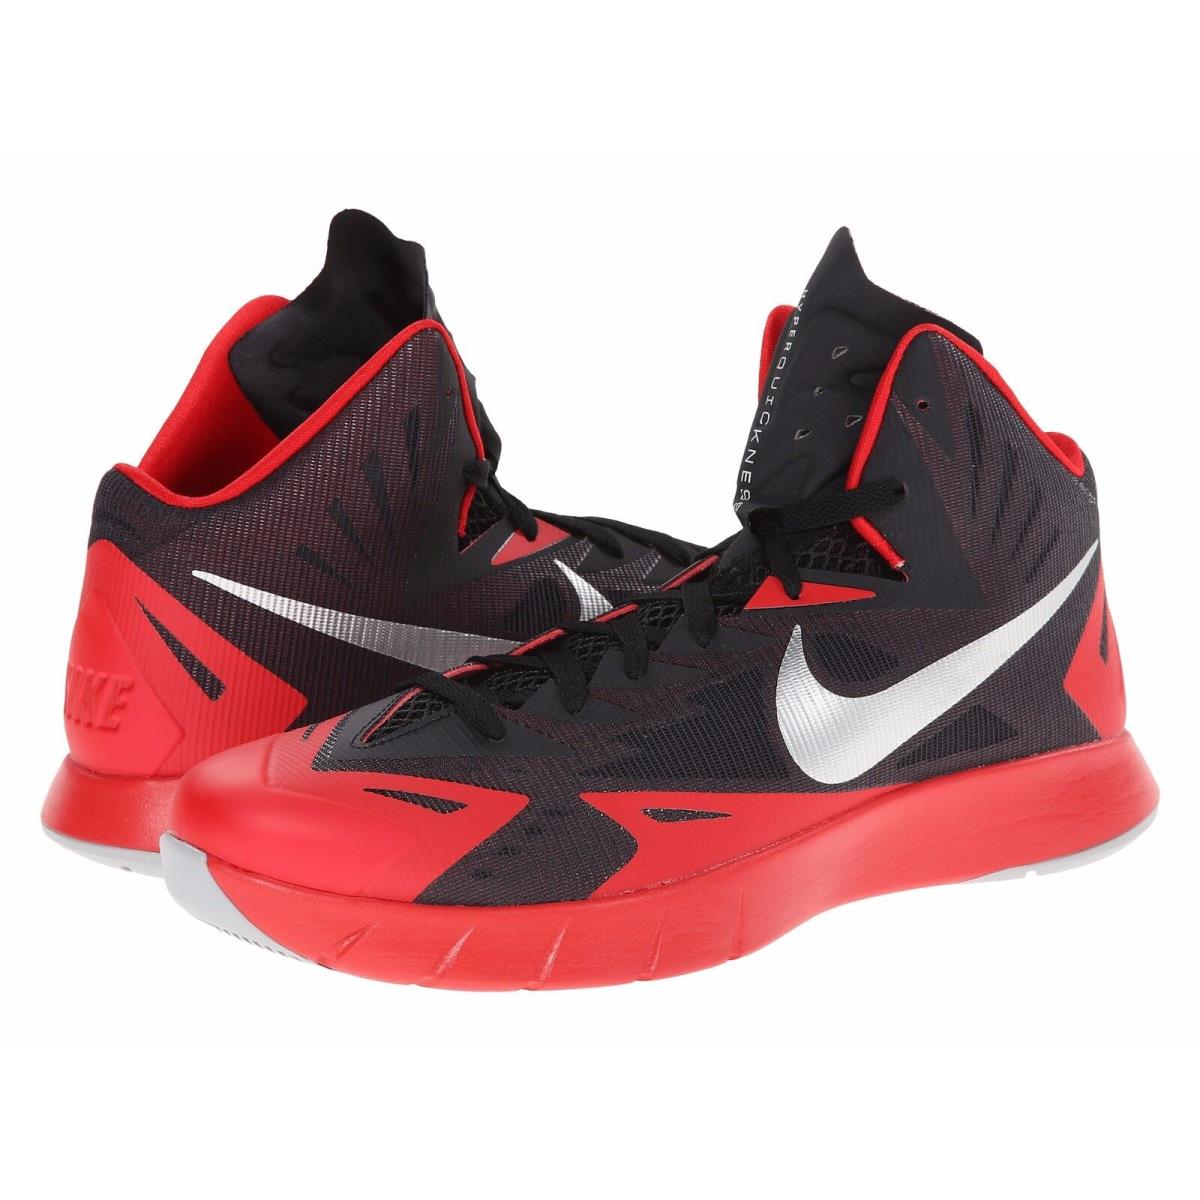 Men`s Nike Lunar Hyperquickness Basketball Shoes 652777 006 Sizes 8-13 Blk/red/ - Black/Wolf Grey/University Red